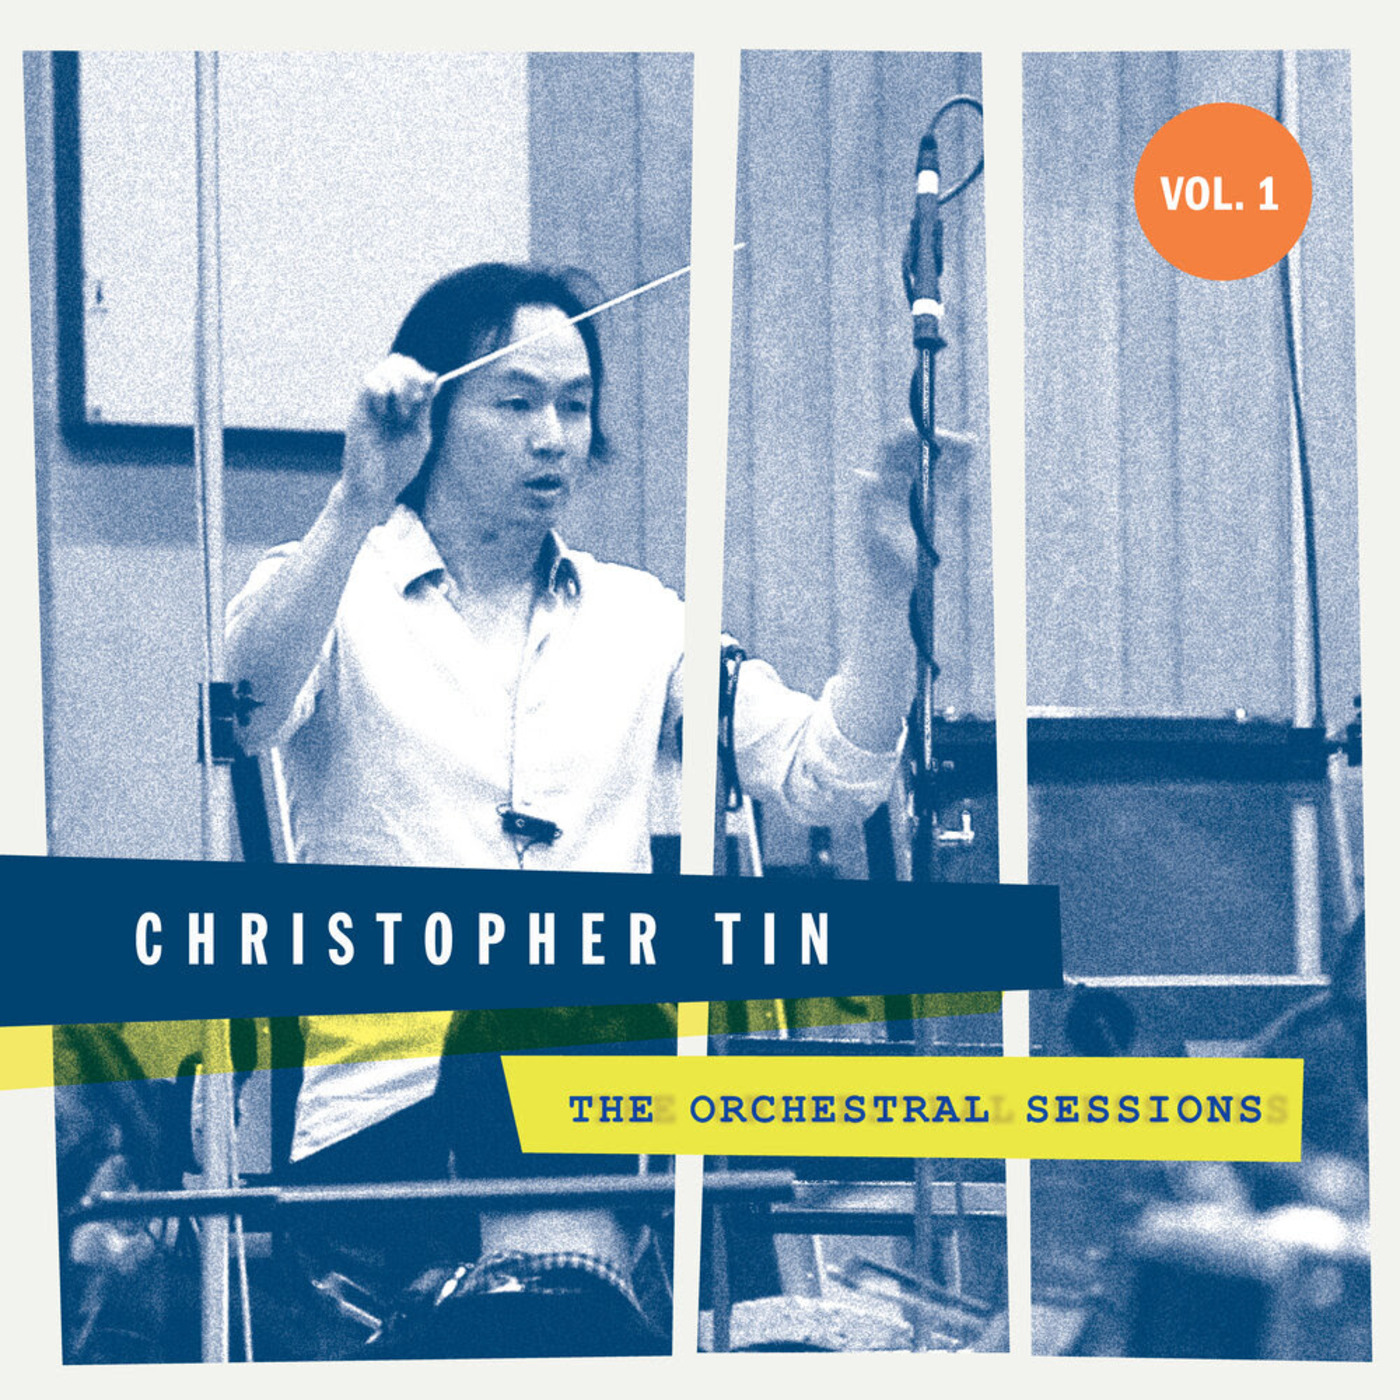 Episode 171: 17171 Christopher Tin: The Orchestral Sessions (Vol. 1)